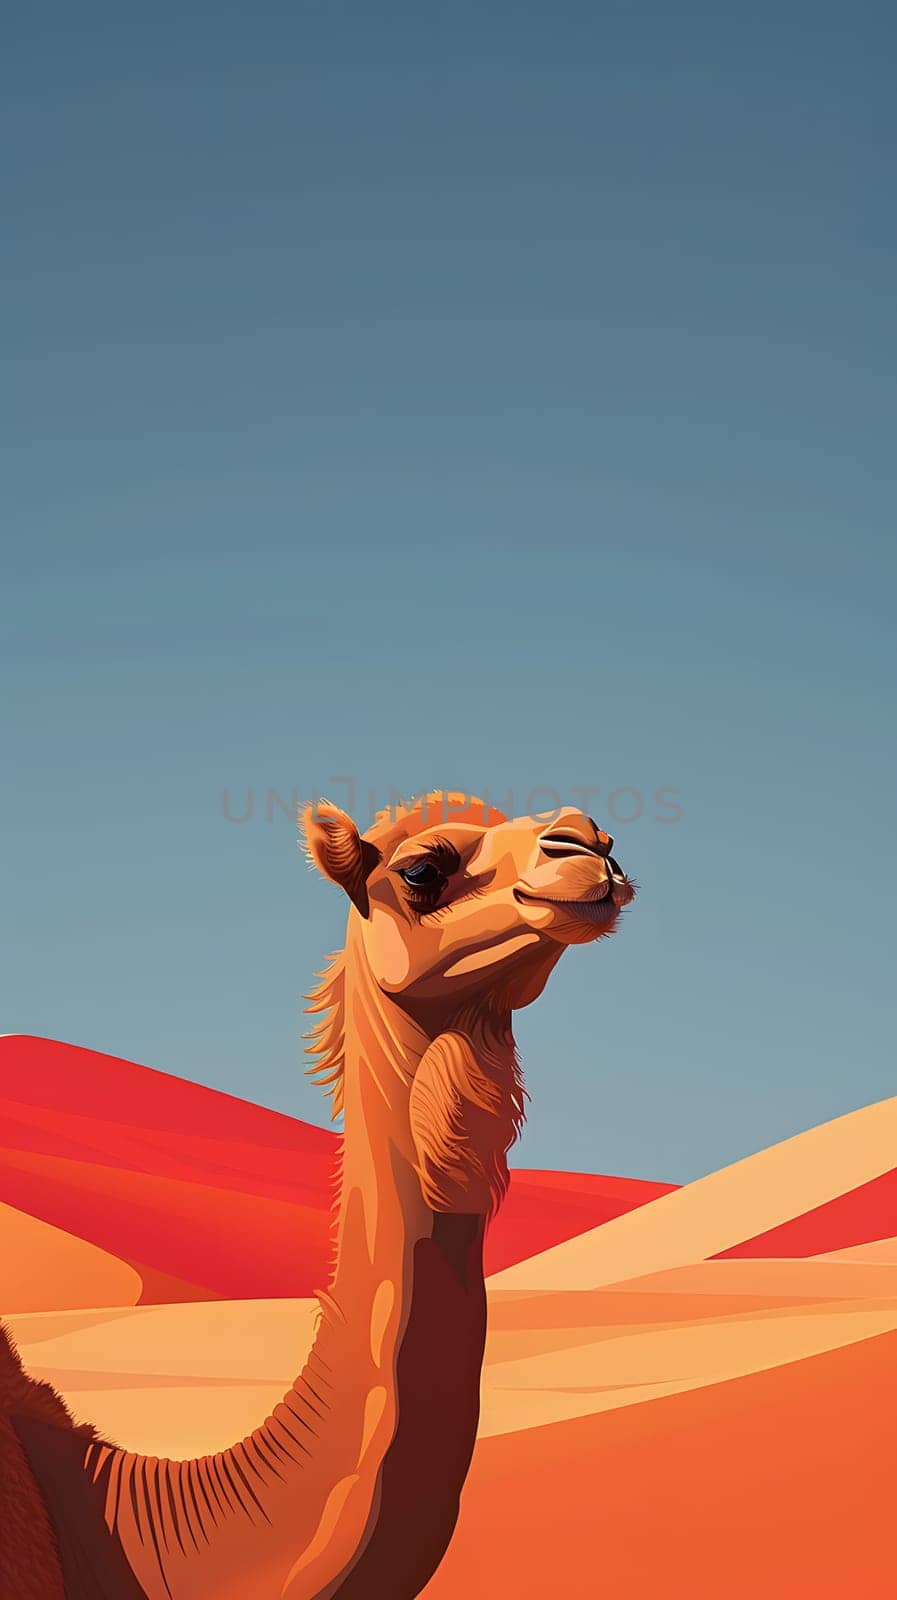 An Arabian camel stands happily in the desert landscape under the vast sky by Nadtochiy